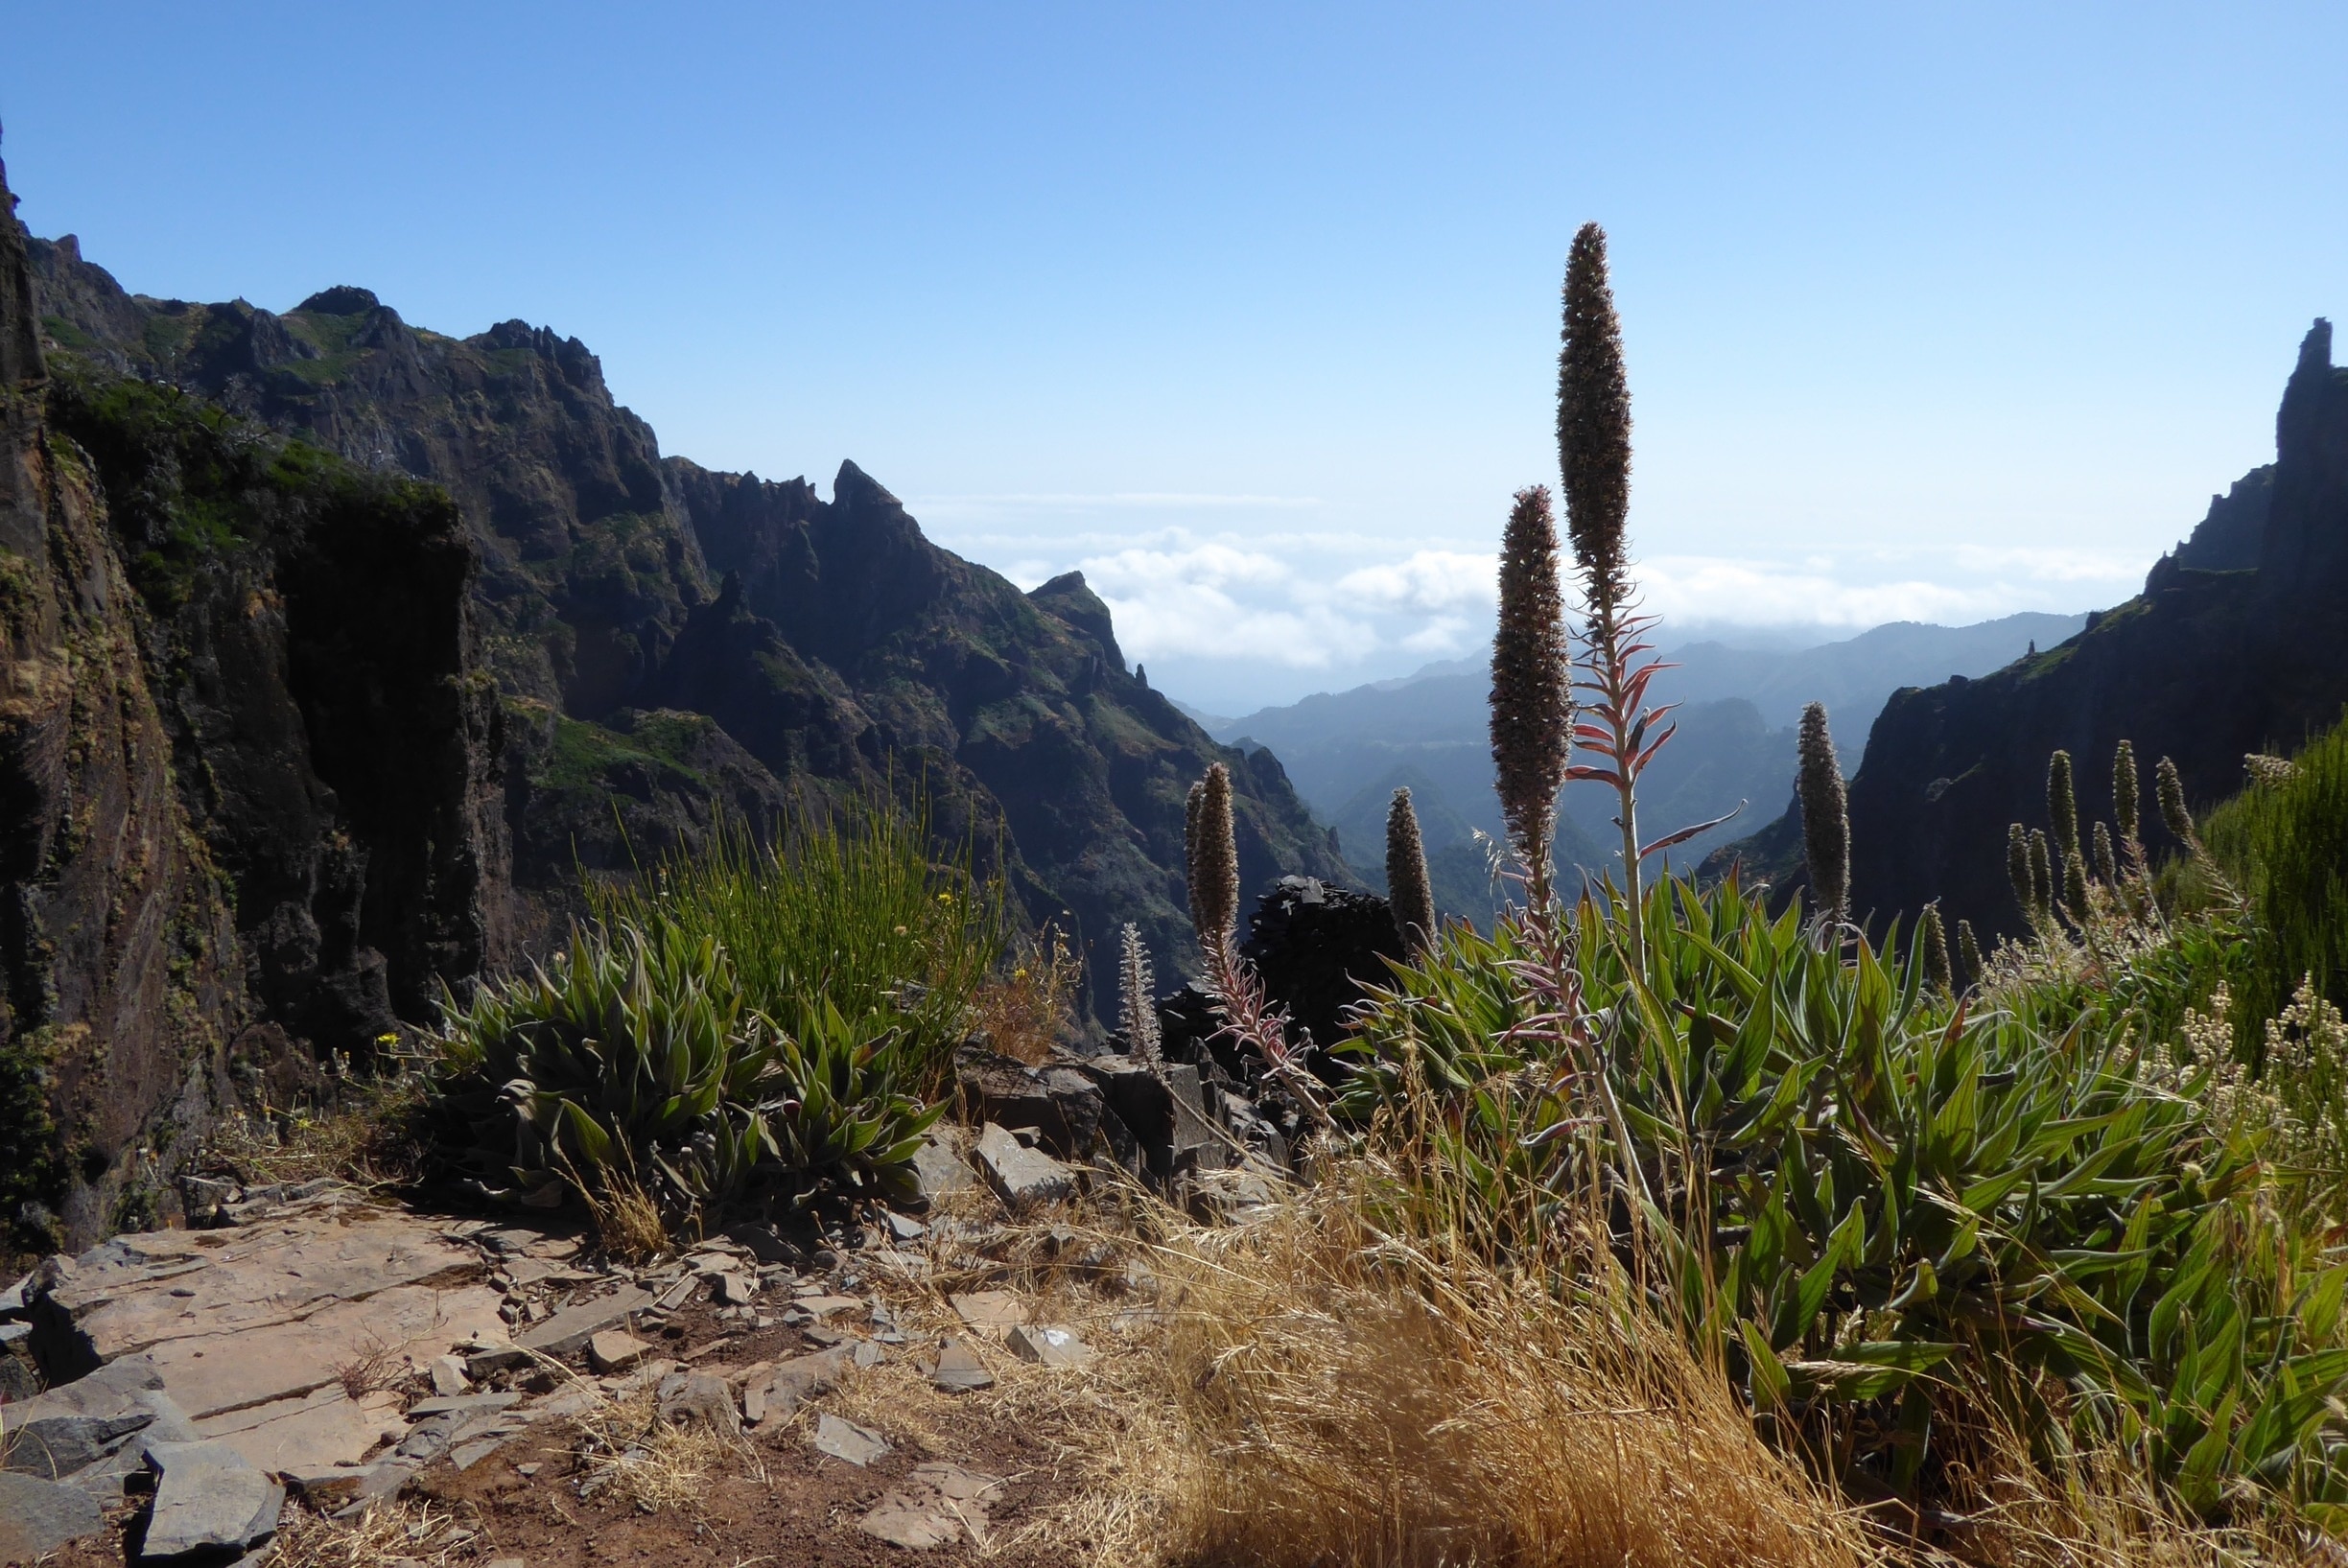 This was taken on my way to the highest peak in Madeira, a beautiful little Portuguese isalnd near the African coast. I met the most friendliest people here on this isalnd. Madeira is so small that you do not need 1 month to go and see everything there is and elderly people speak very good English too !
#madeira #outdoor #nature #hiking 